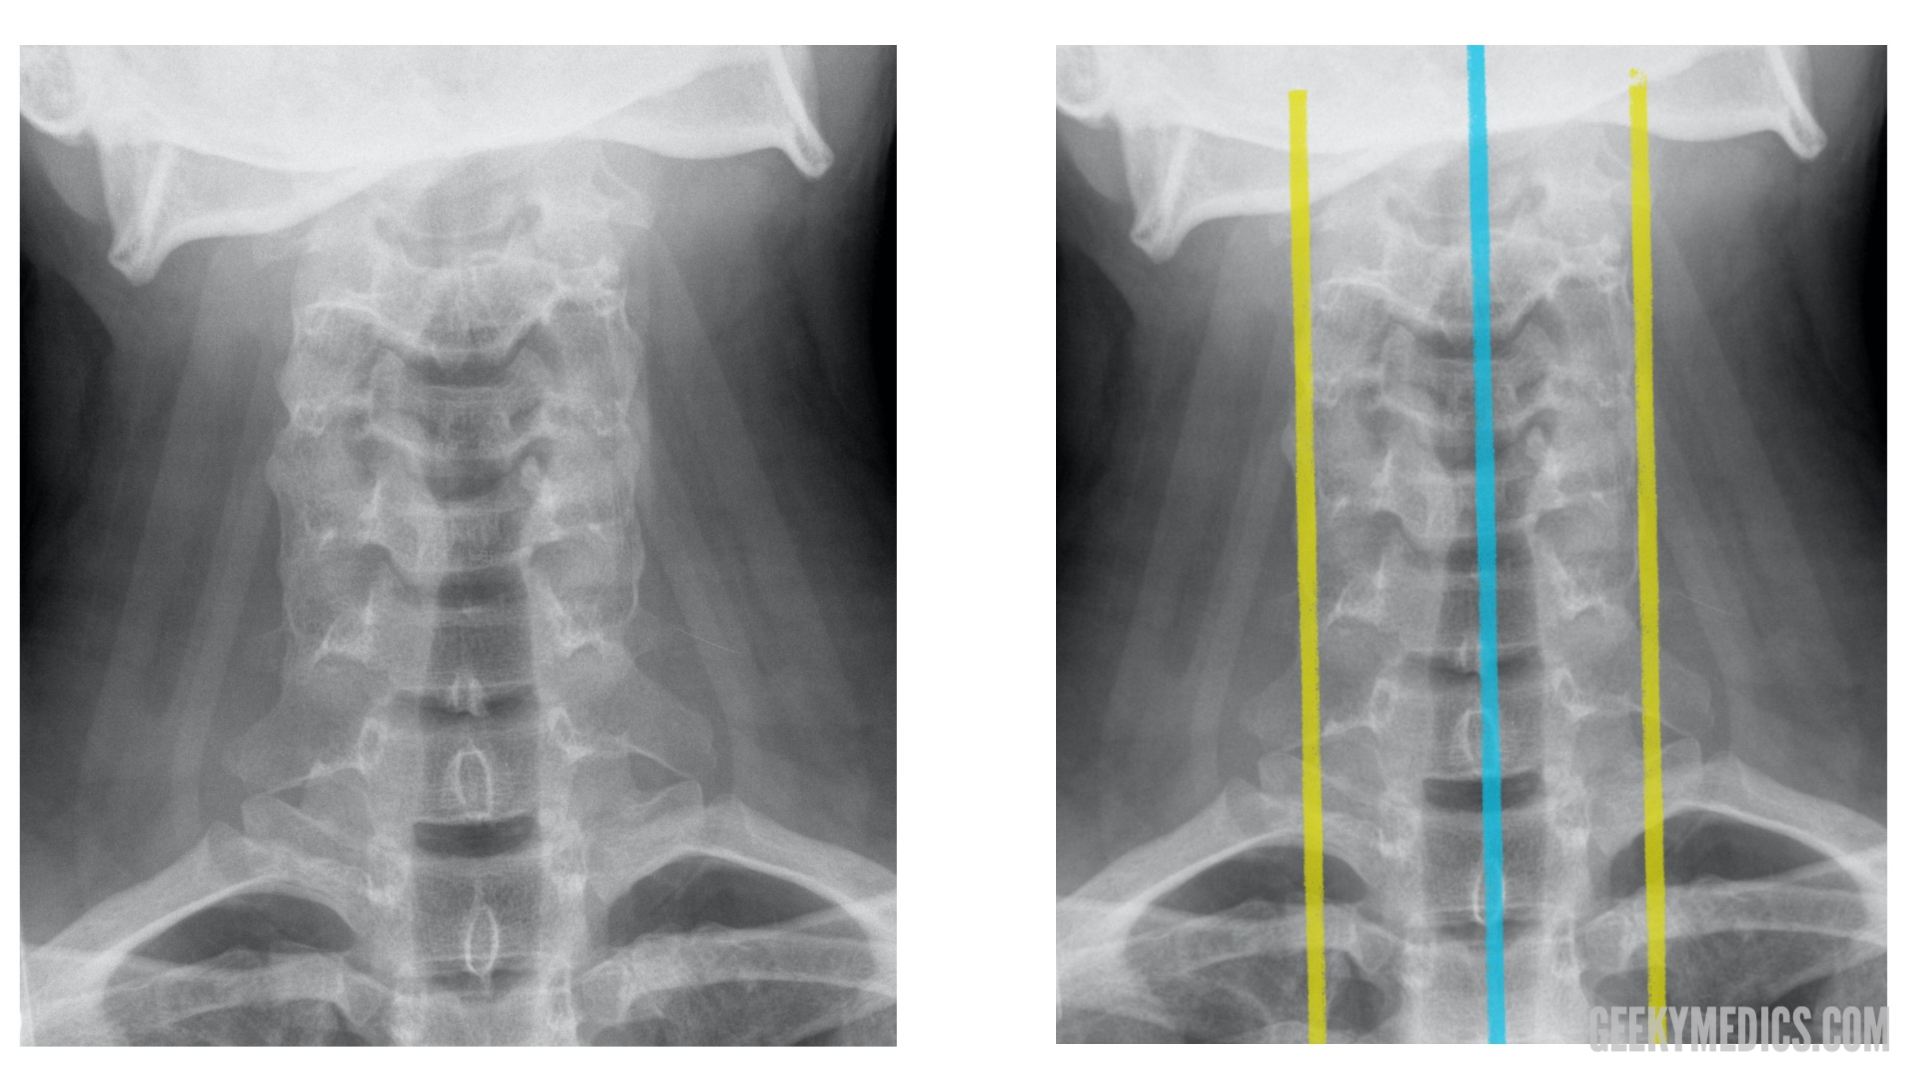 Xray cervical spine AP and lateral shows straightening of cervical spine?  What does it mean? - Quora